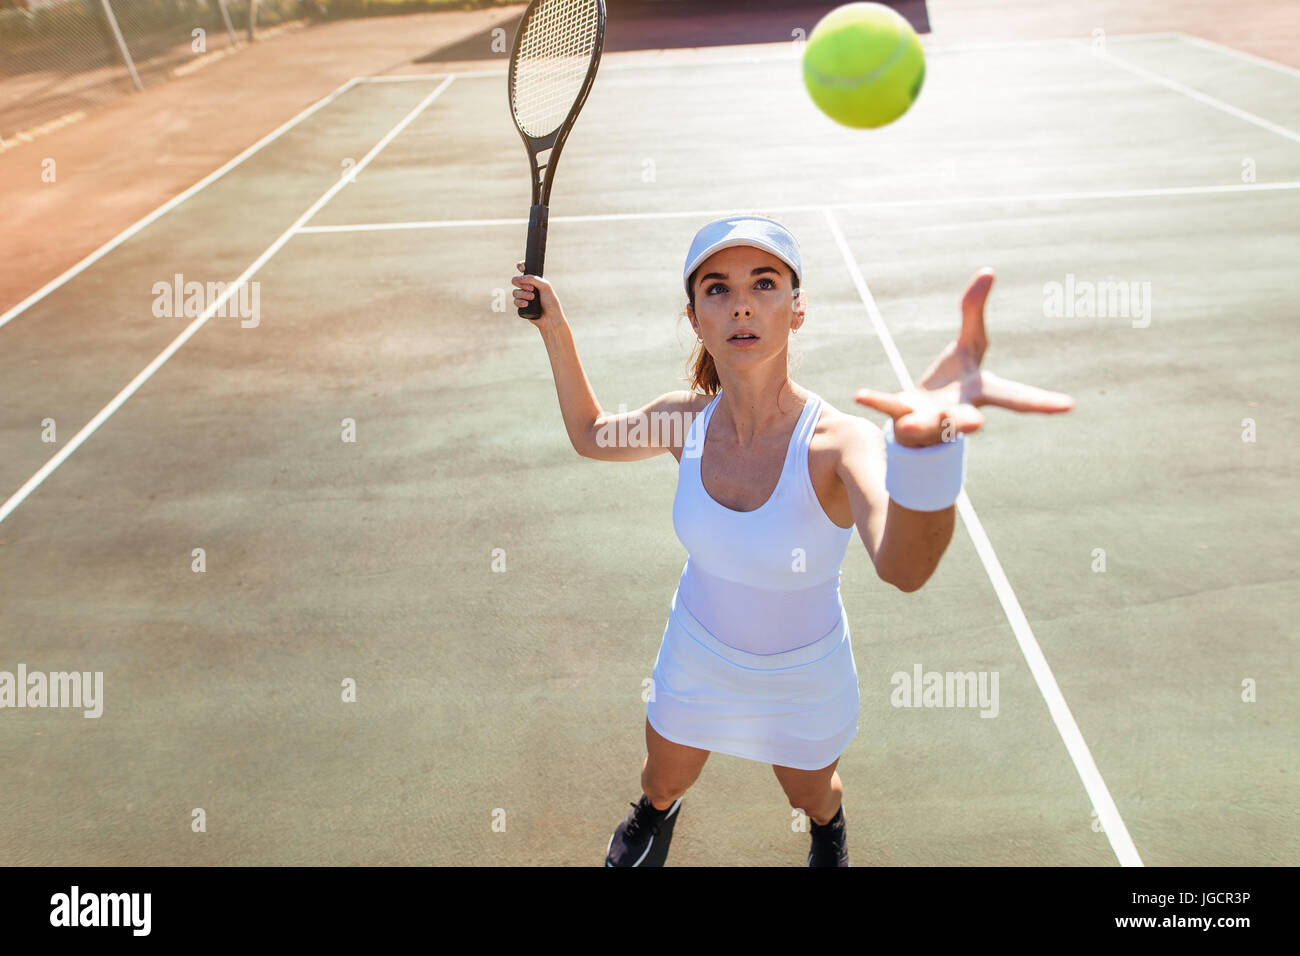 Beautiful young female tennis player serving the ball. Young woman in sportswear playing tennis match on court. Stock Photo